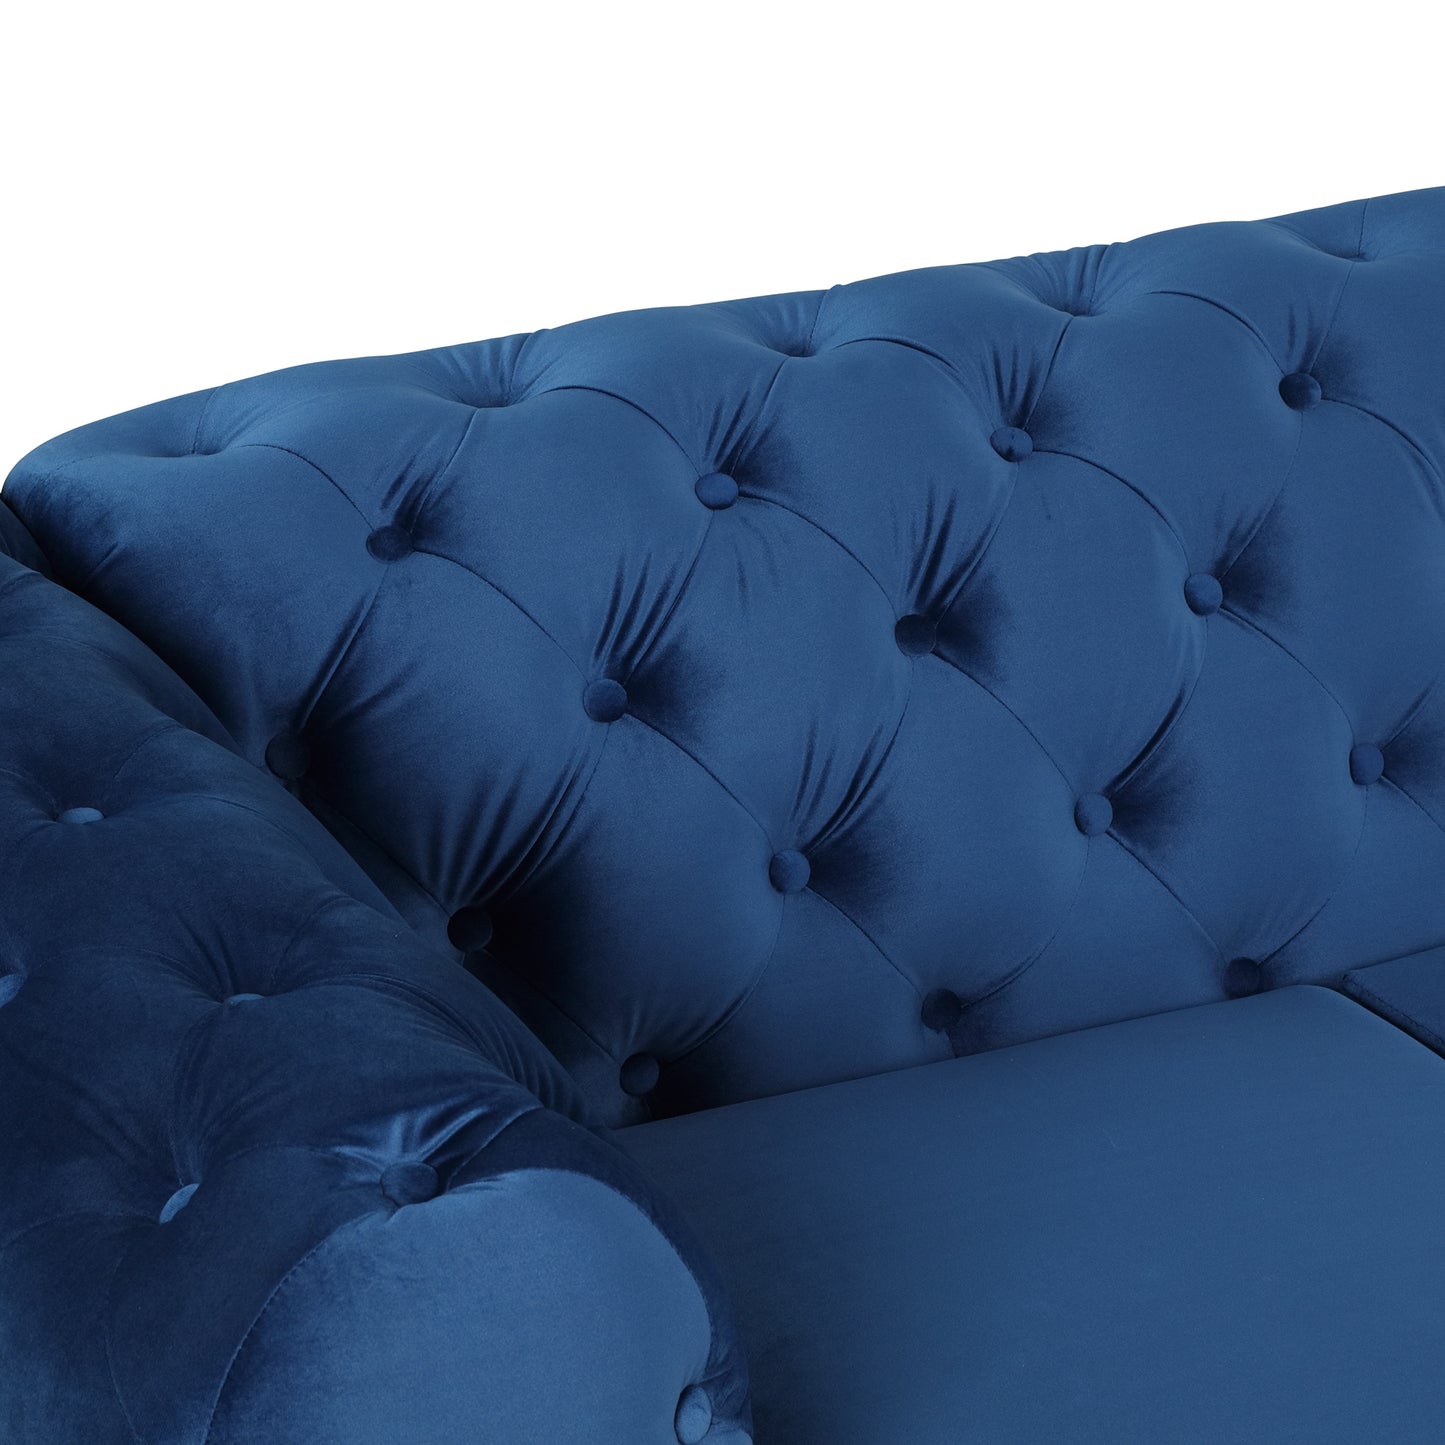 63" Velvet Upholstered Loveseat Sofa,Modern Loveseat Sofa with Button Tufted Back,2-Person Loveseat Sofa Couch for Living Room,Bedroom,or Small Space,Blue